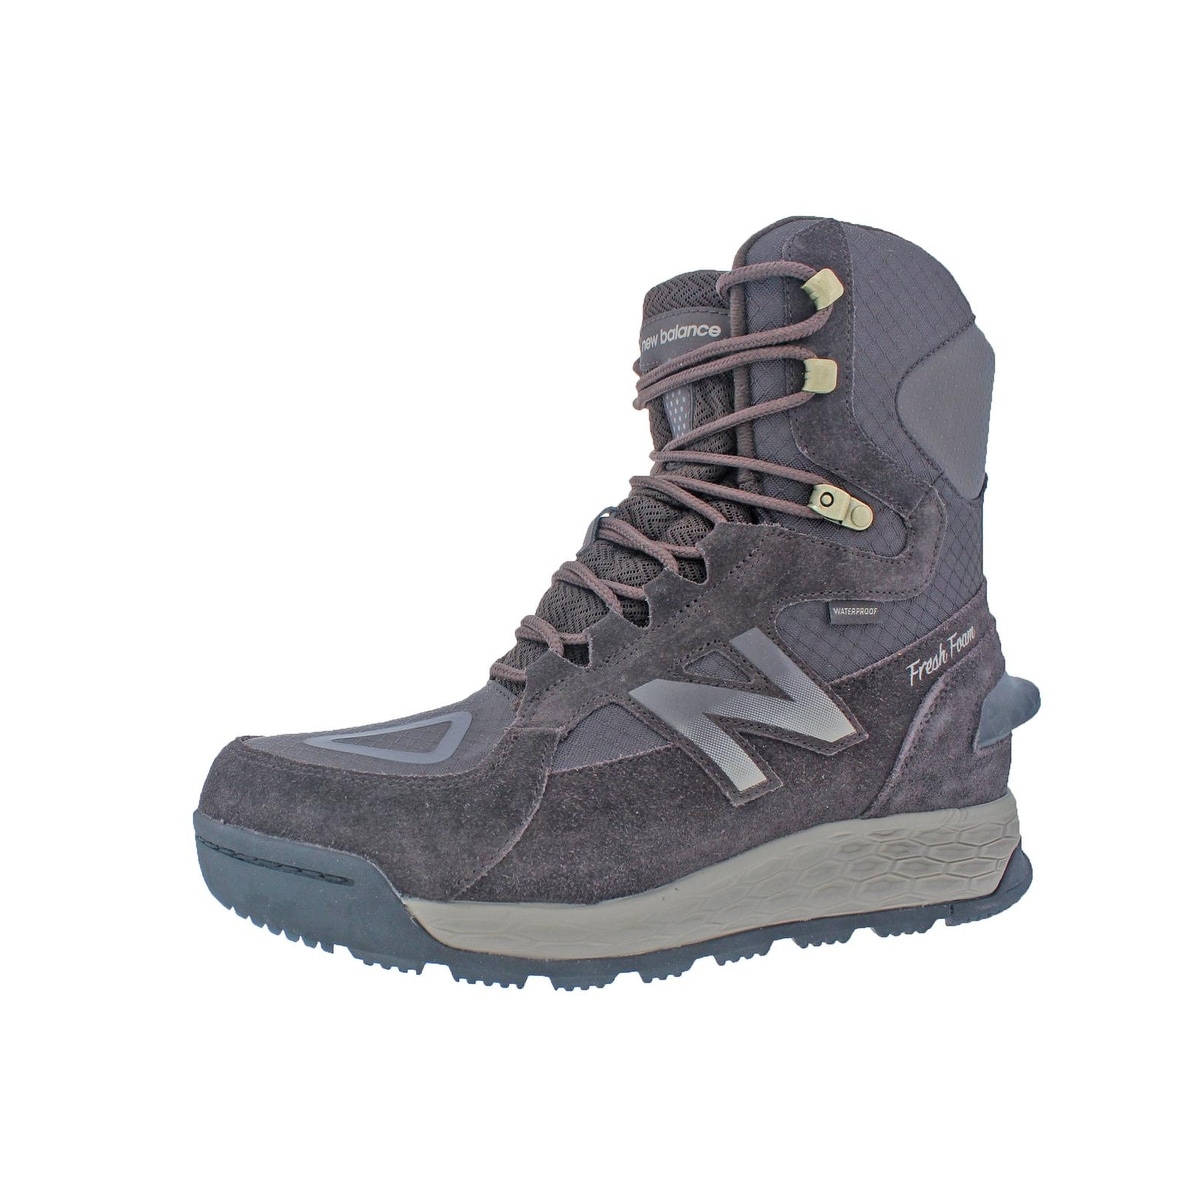 new balance men's 1000 cold weather boots